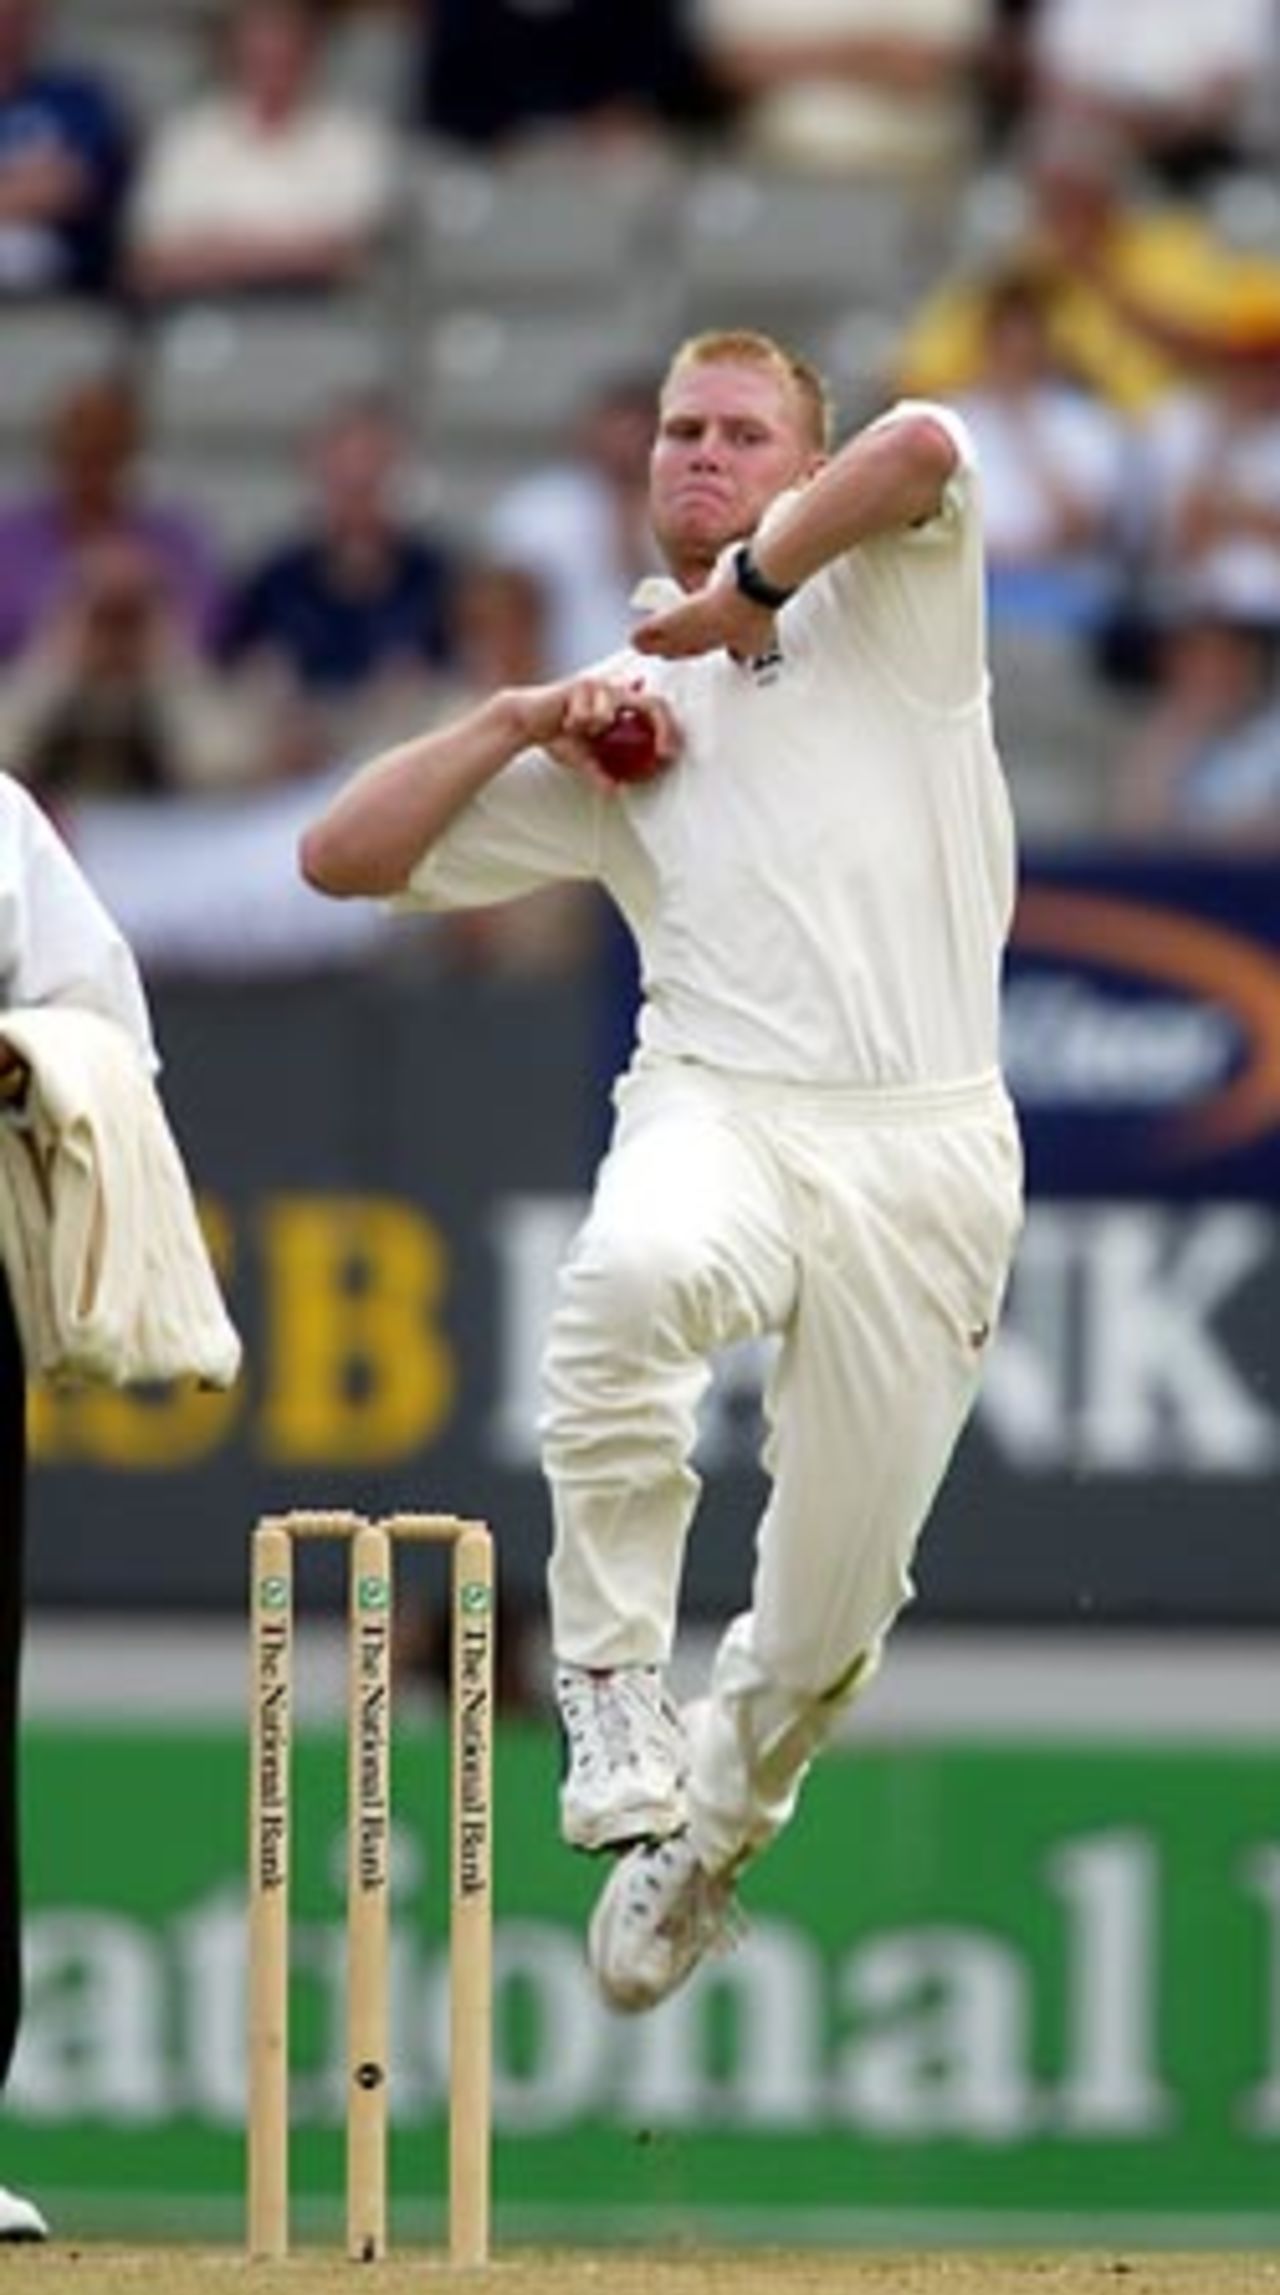 England bowler Matthew Hoggard delivers a ball during his first day spell of 1-47 from 18 overs. 3rd Test: New Zealand v England at Eden Park, Auckland, 30 March-3 April 2002 (30 March 2002).